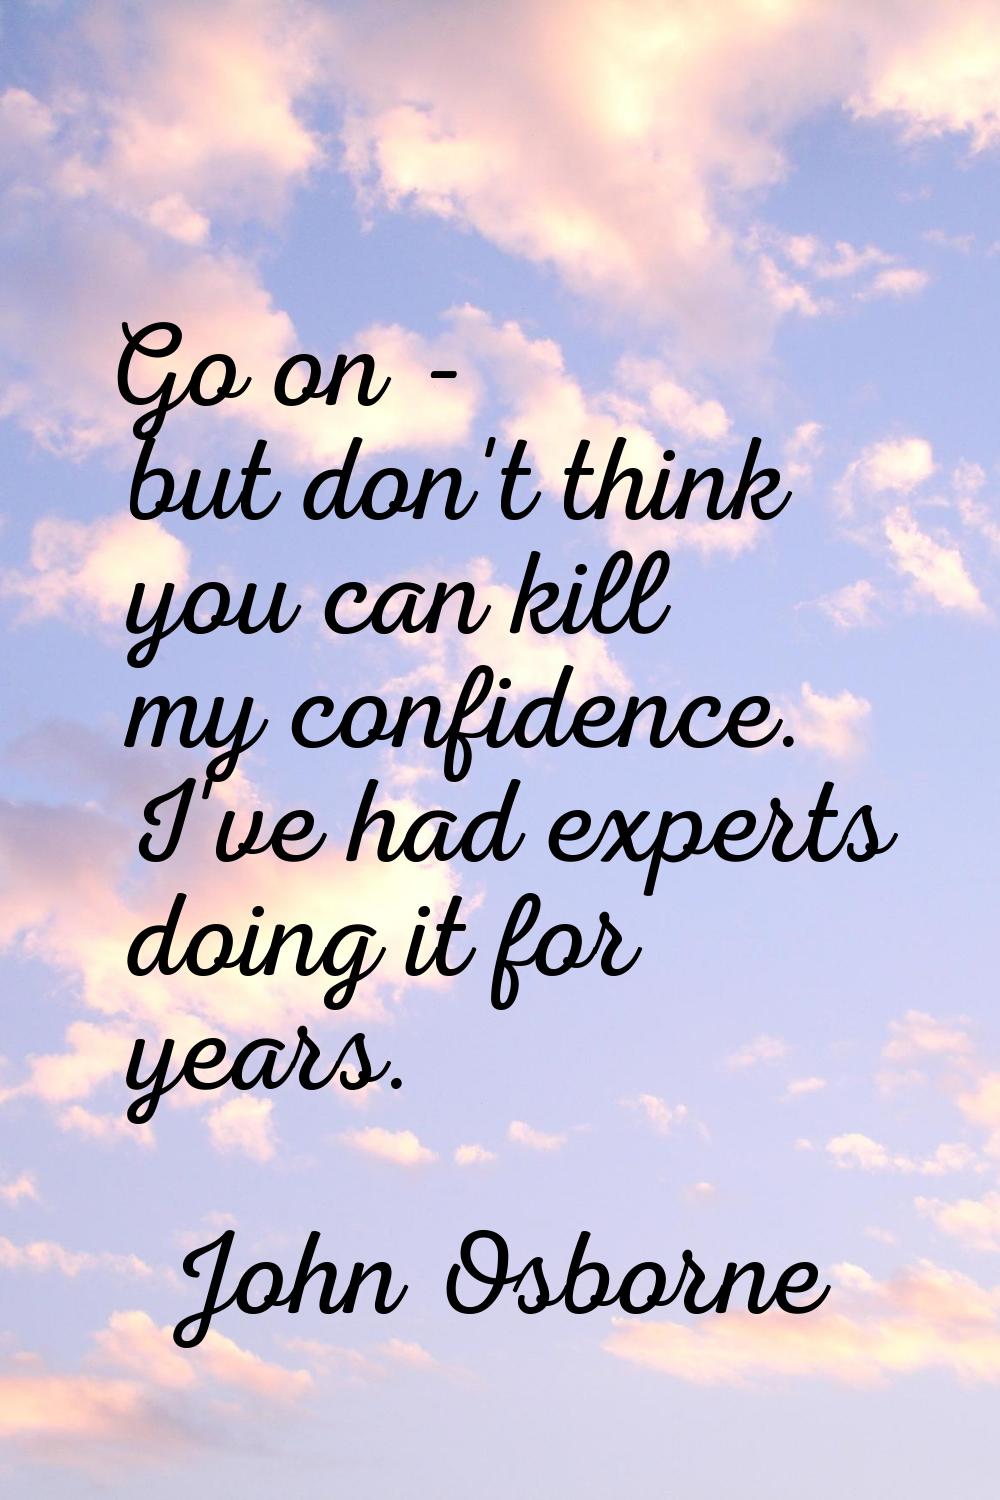 Go on - but don't think you can kill my confidence. I've had experts doing it for years.